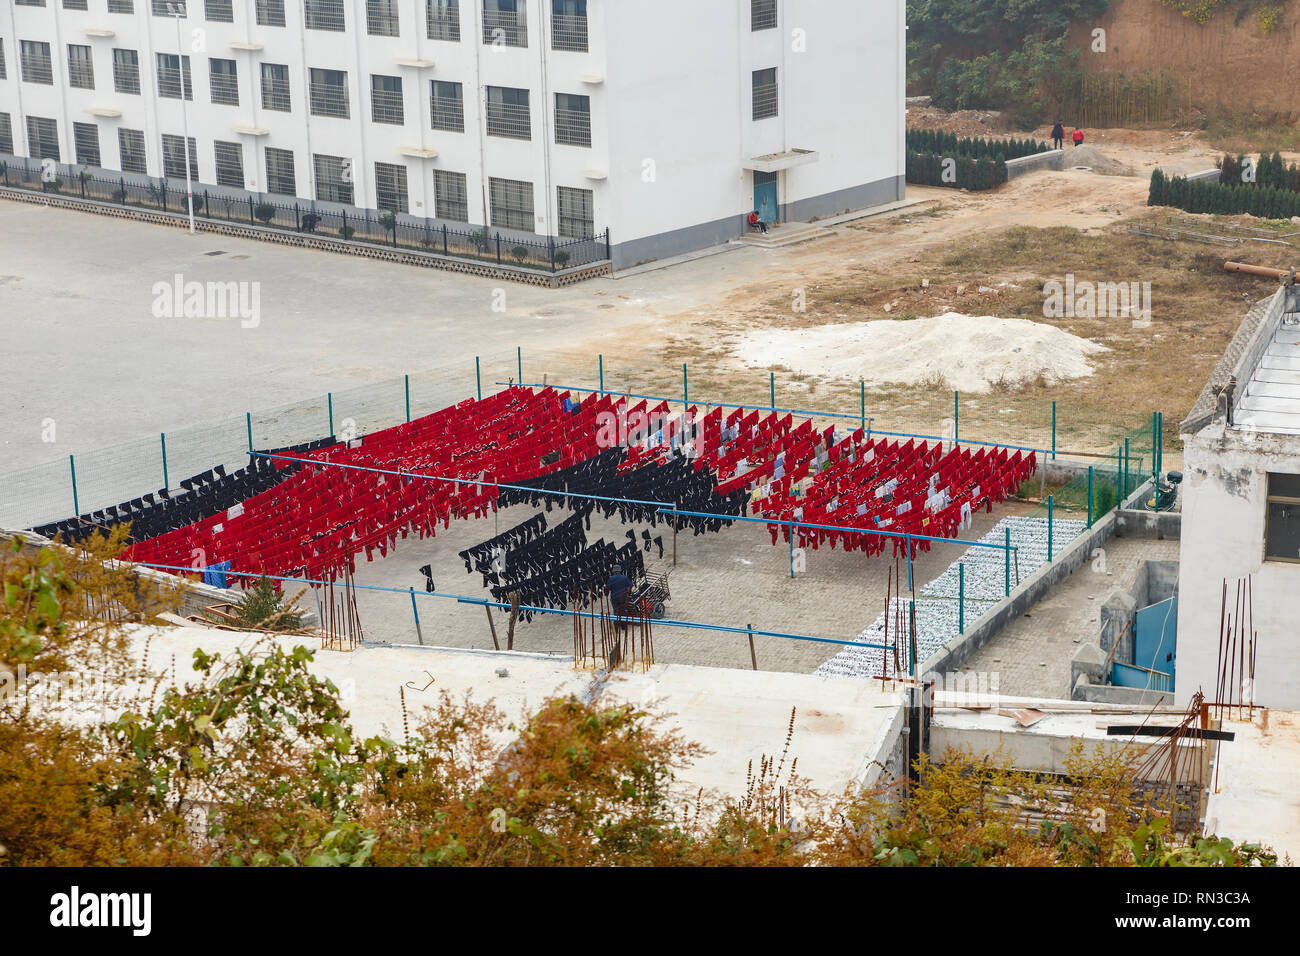 Dengfeng, China - October 17, 2018: The training uniform of pupils of the martial arts school is dried on a rope in the street after washing. Shaolin Temple. Stock Photo